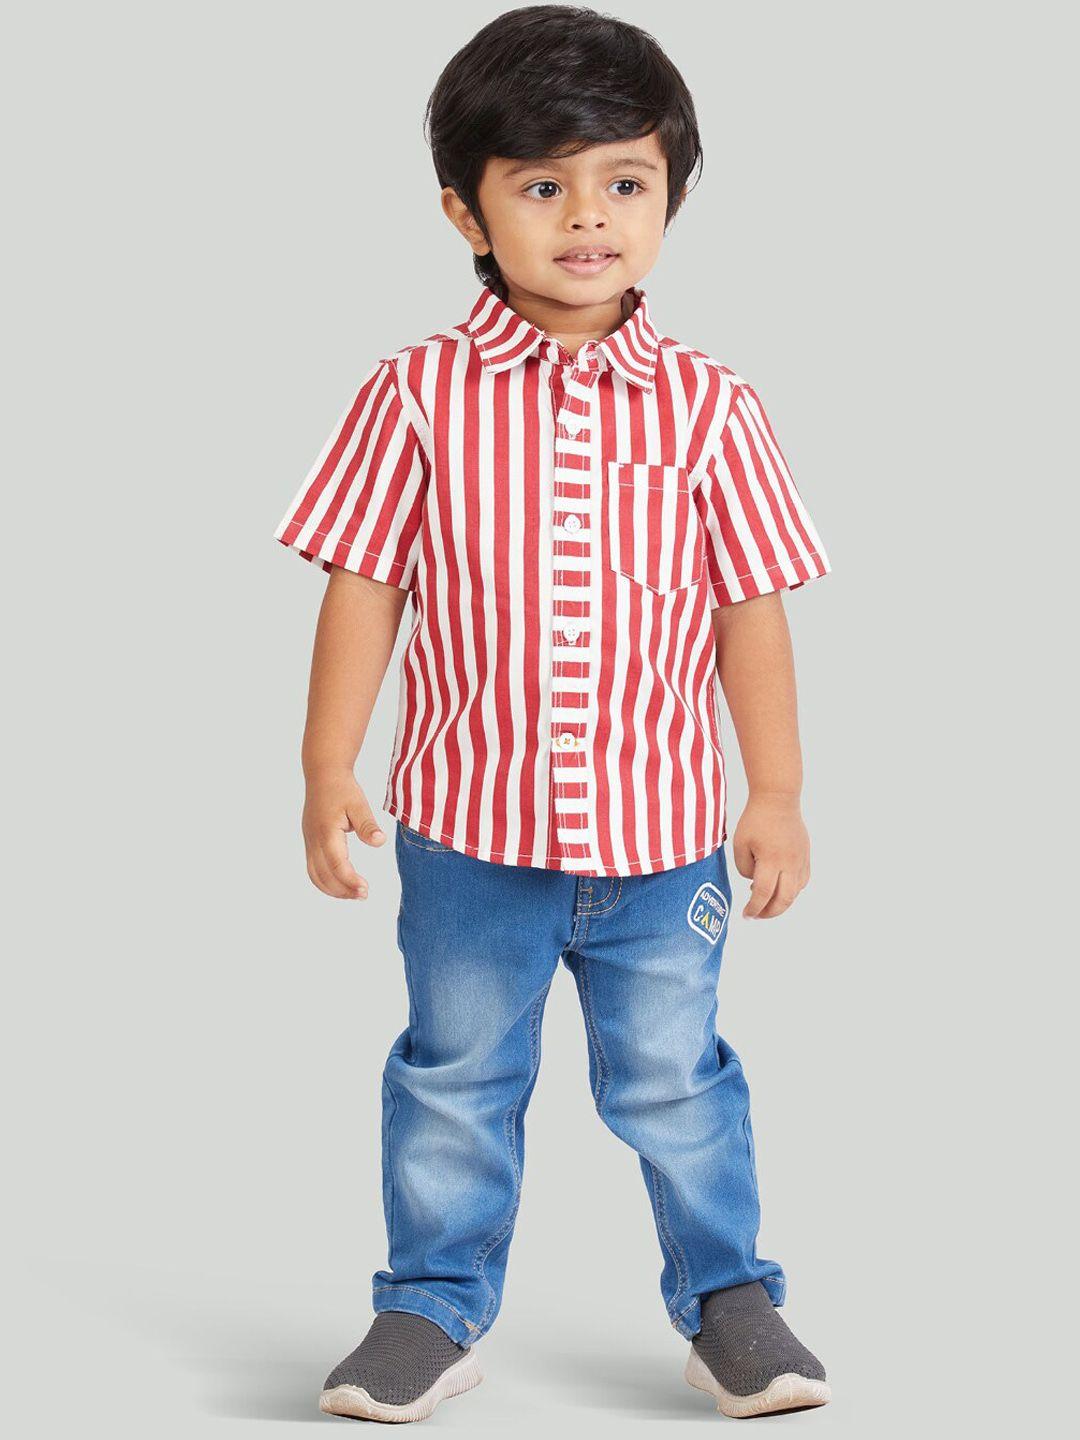 zalio boys red & blue striped shirt with jeans